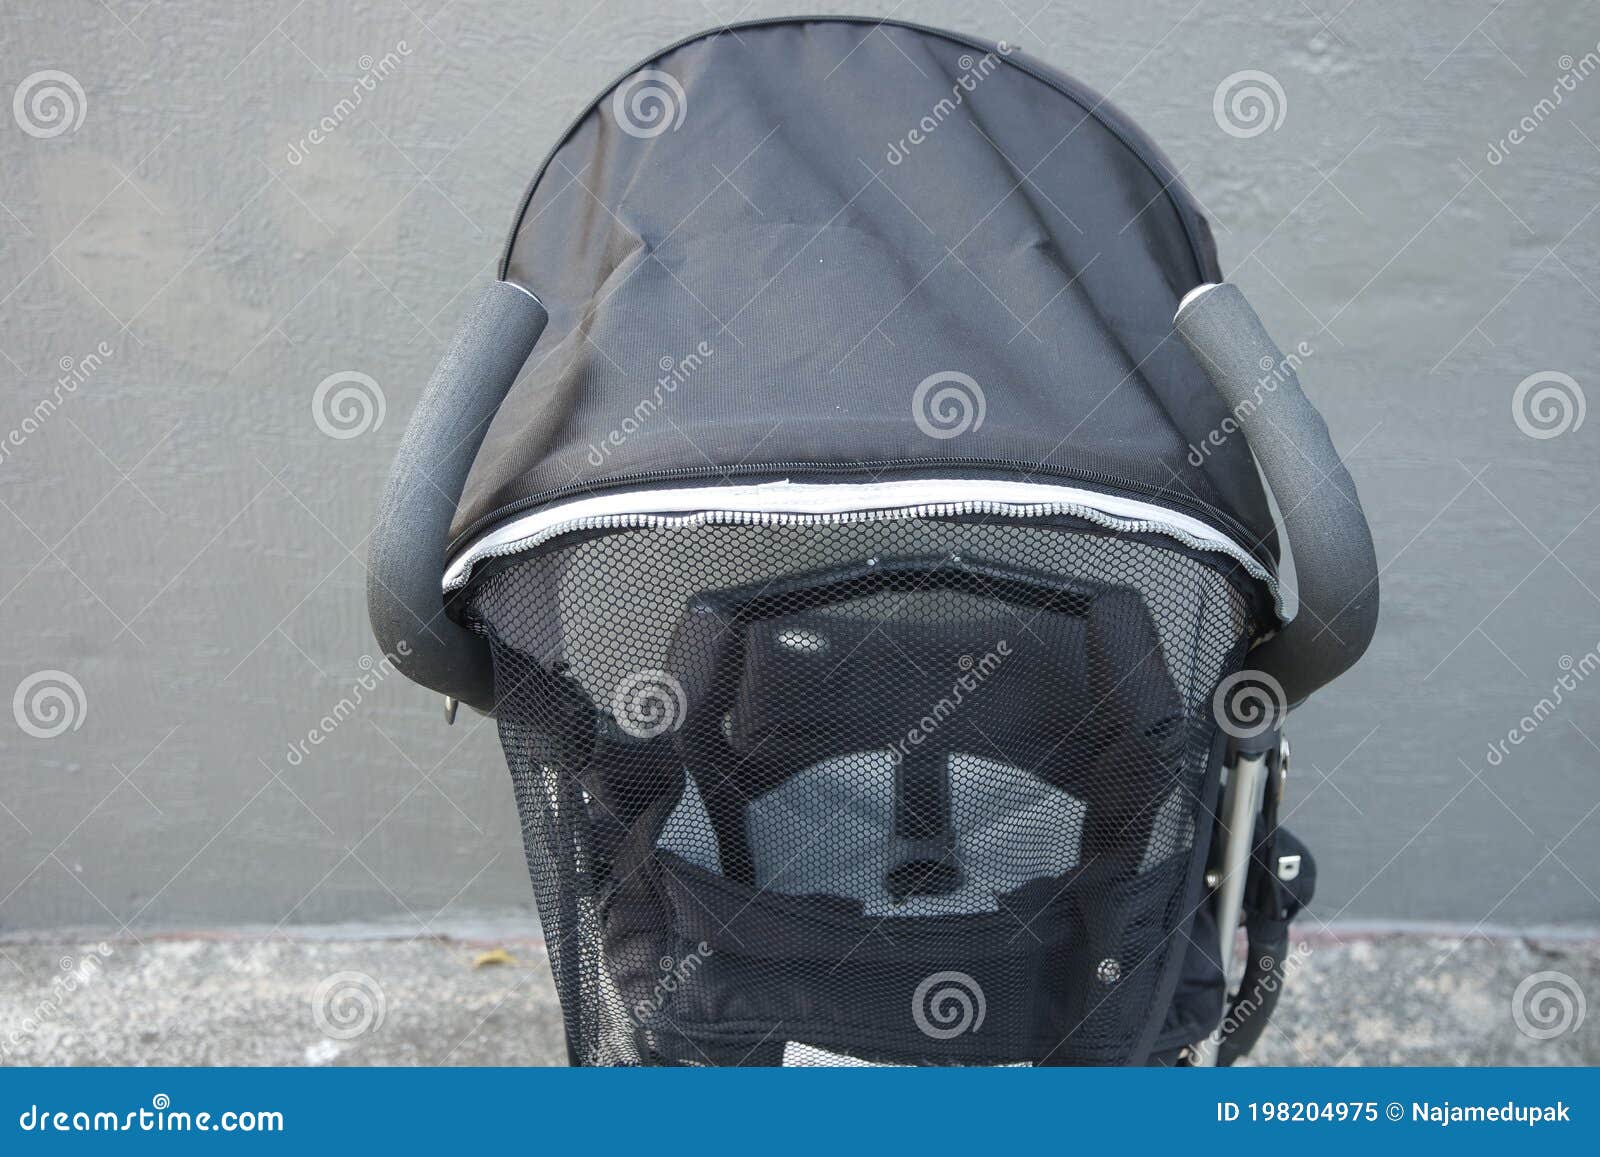 black color baby stroller with head covering